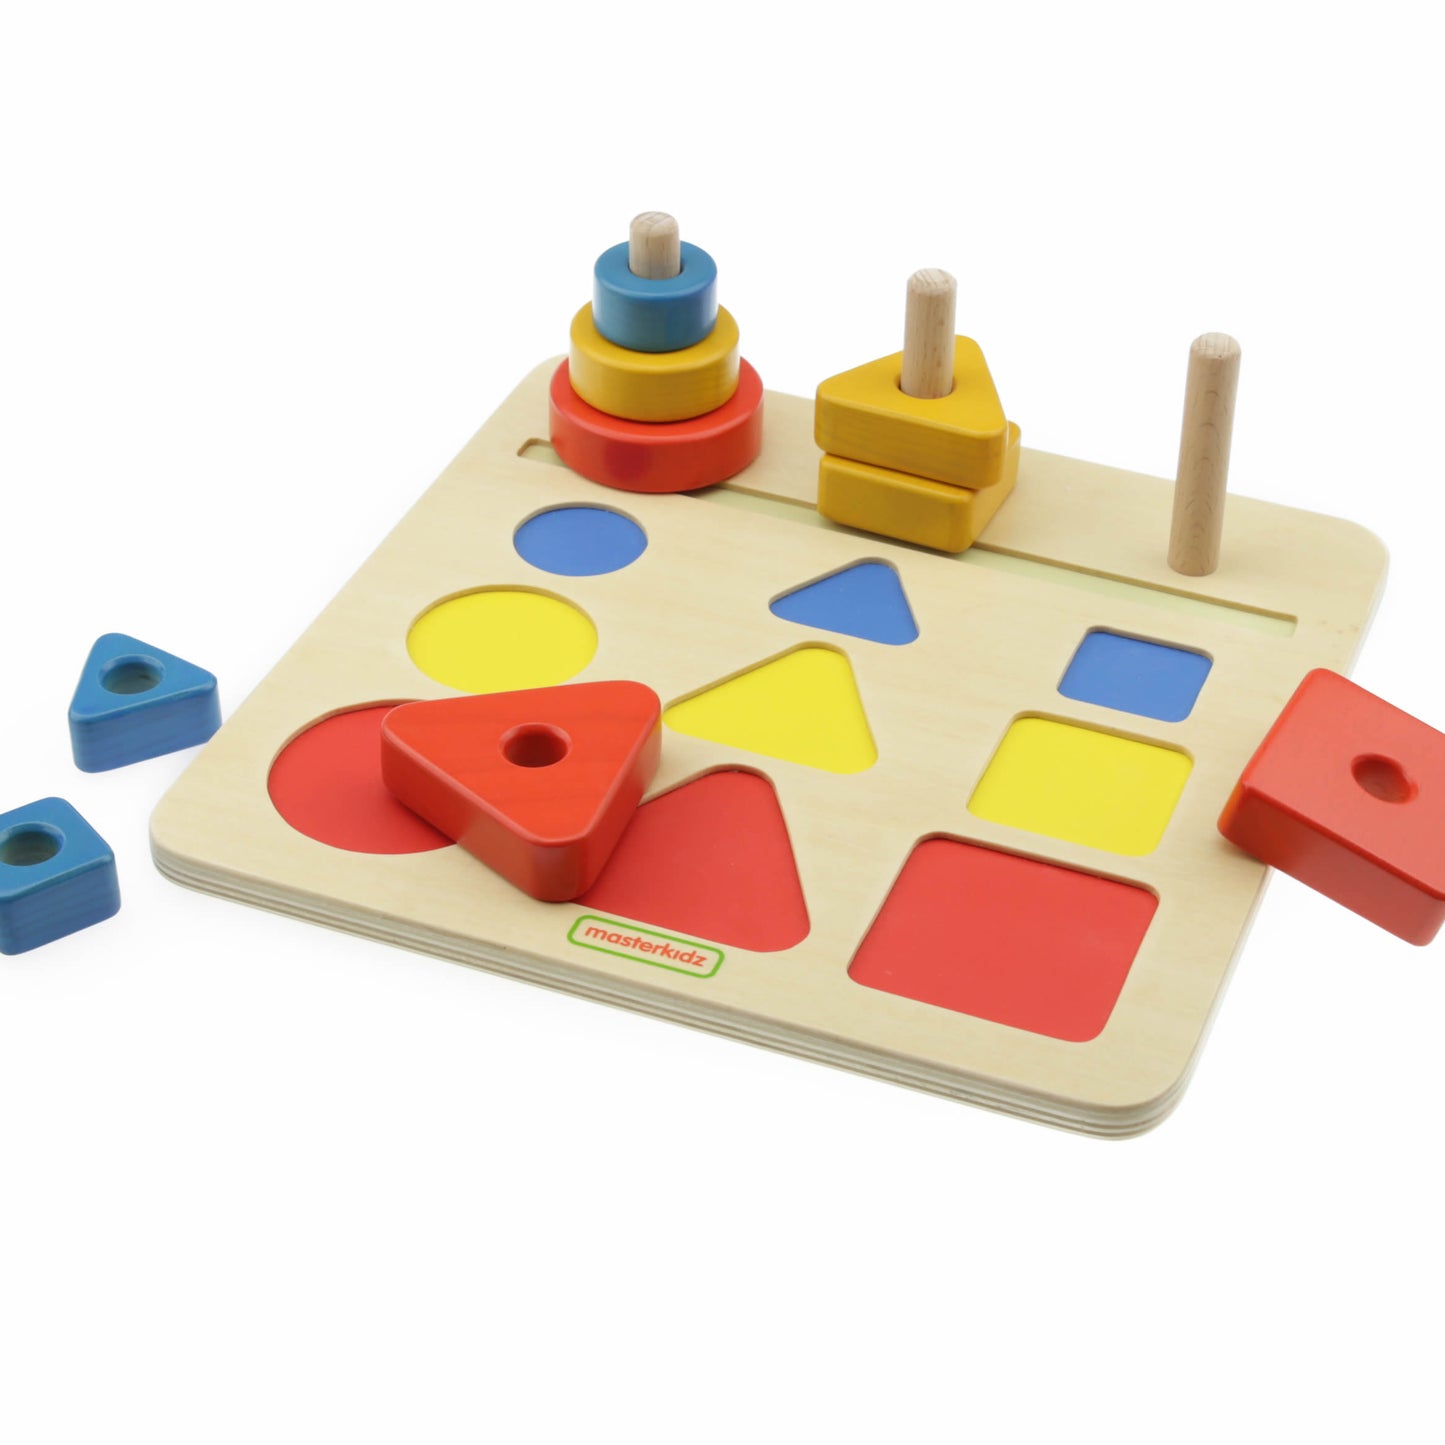 Masterkidz Shapes, Colours and Sizes  Stacker Blocks 形狀、顏色與大小套塔遊戲